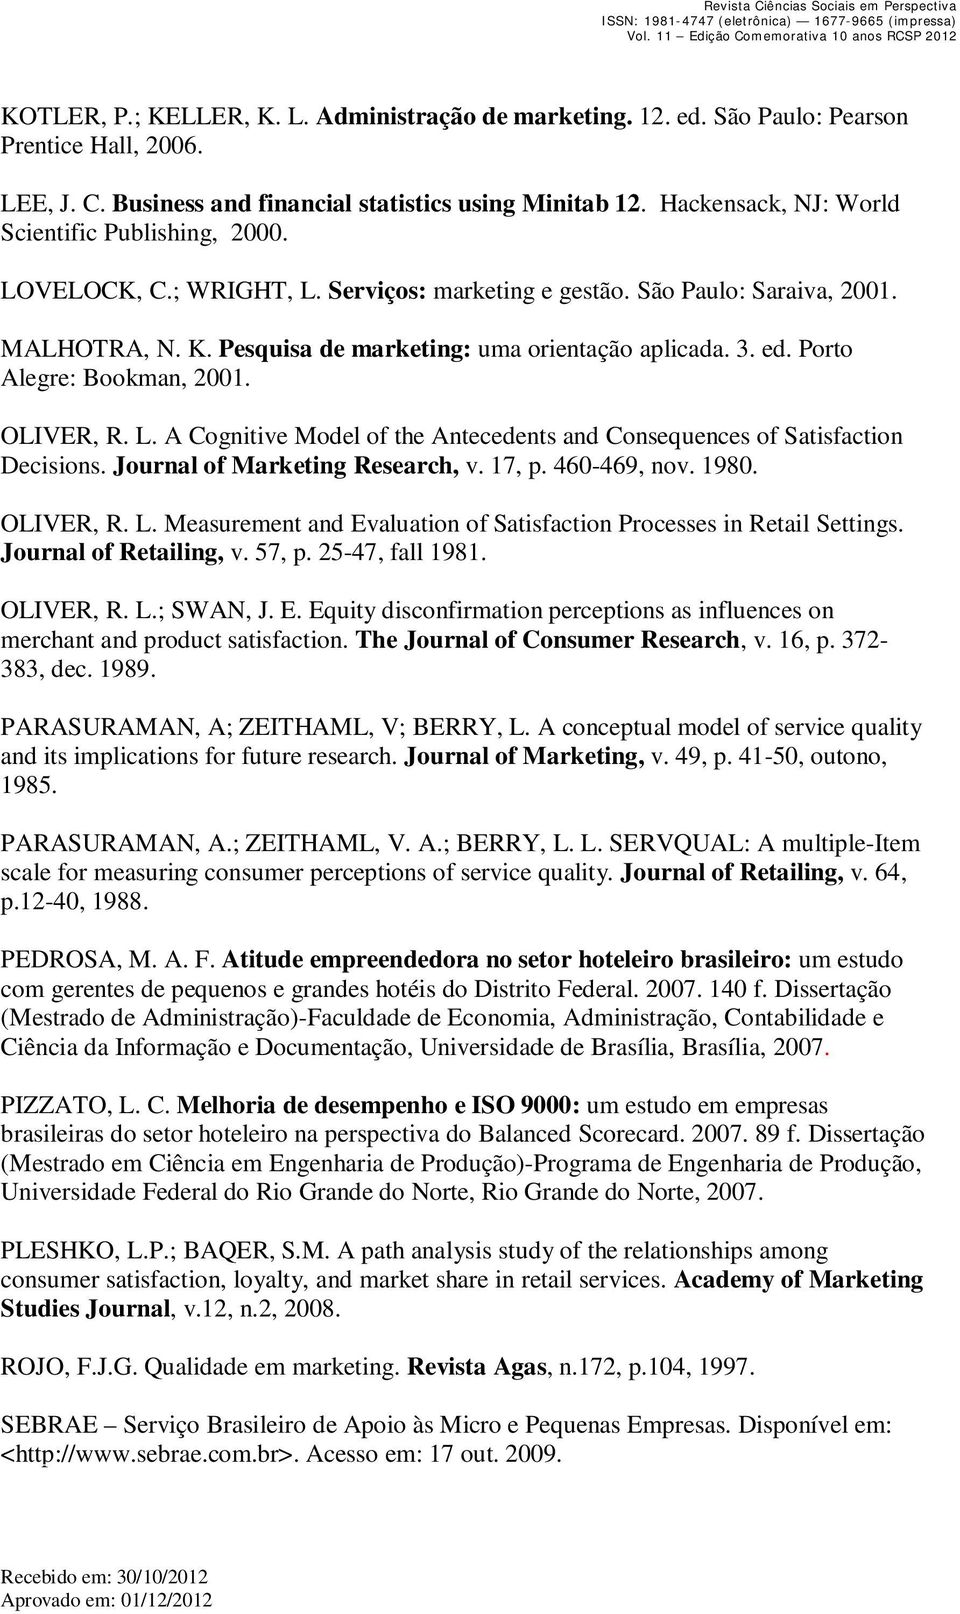 ed. Porto Alegre: Bookman, 2001. OLIVER, R. L. A Cognitive Model of the Antecedents and Consequences of Satisfaction Decisions. Journal of Marketing Research, v. 17, p. 460-469, nov. 1980. OLIVER, R. L. Measurement and Evaluation of Satisfaction Processes in Retail Settings.